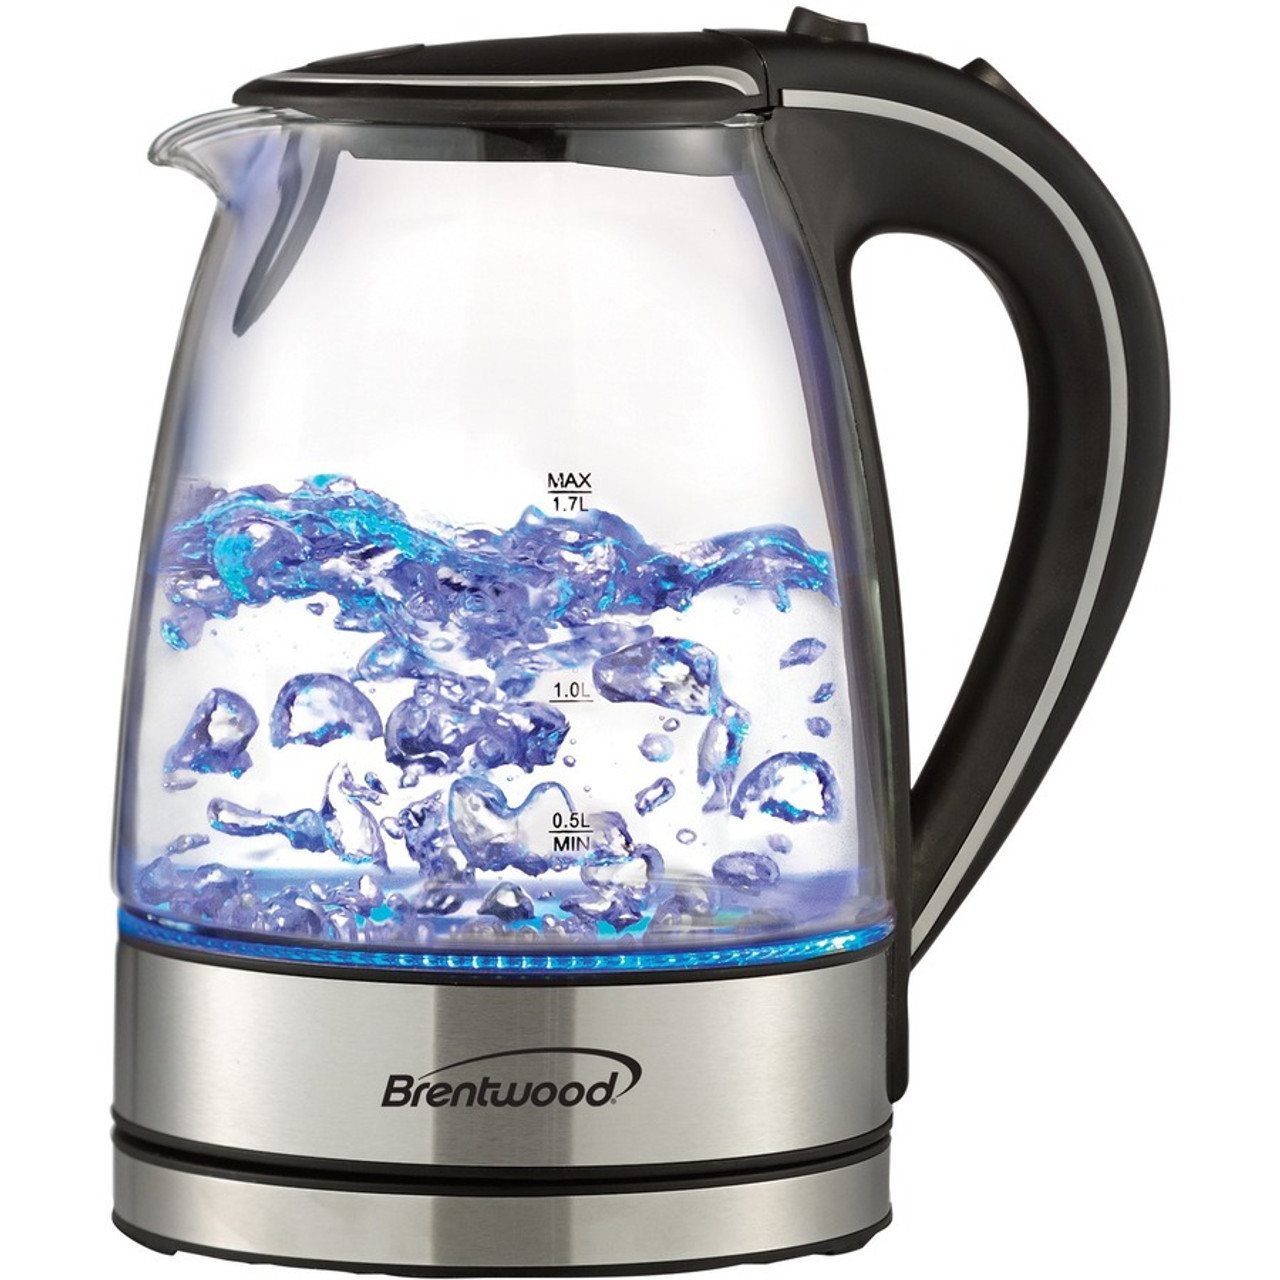 MegaChef 1.7Lt. Stainless Steel Kettle with Electric Base - Silver